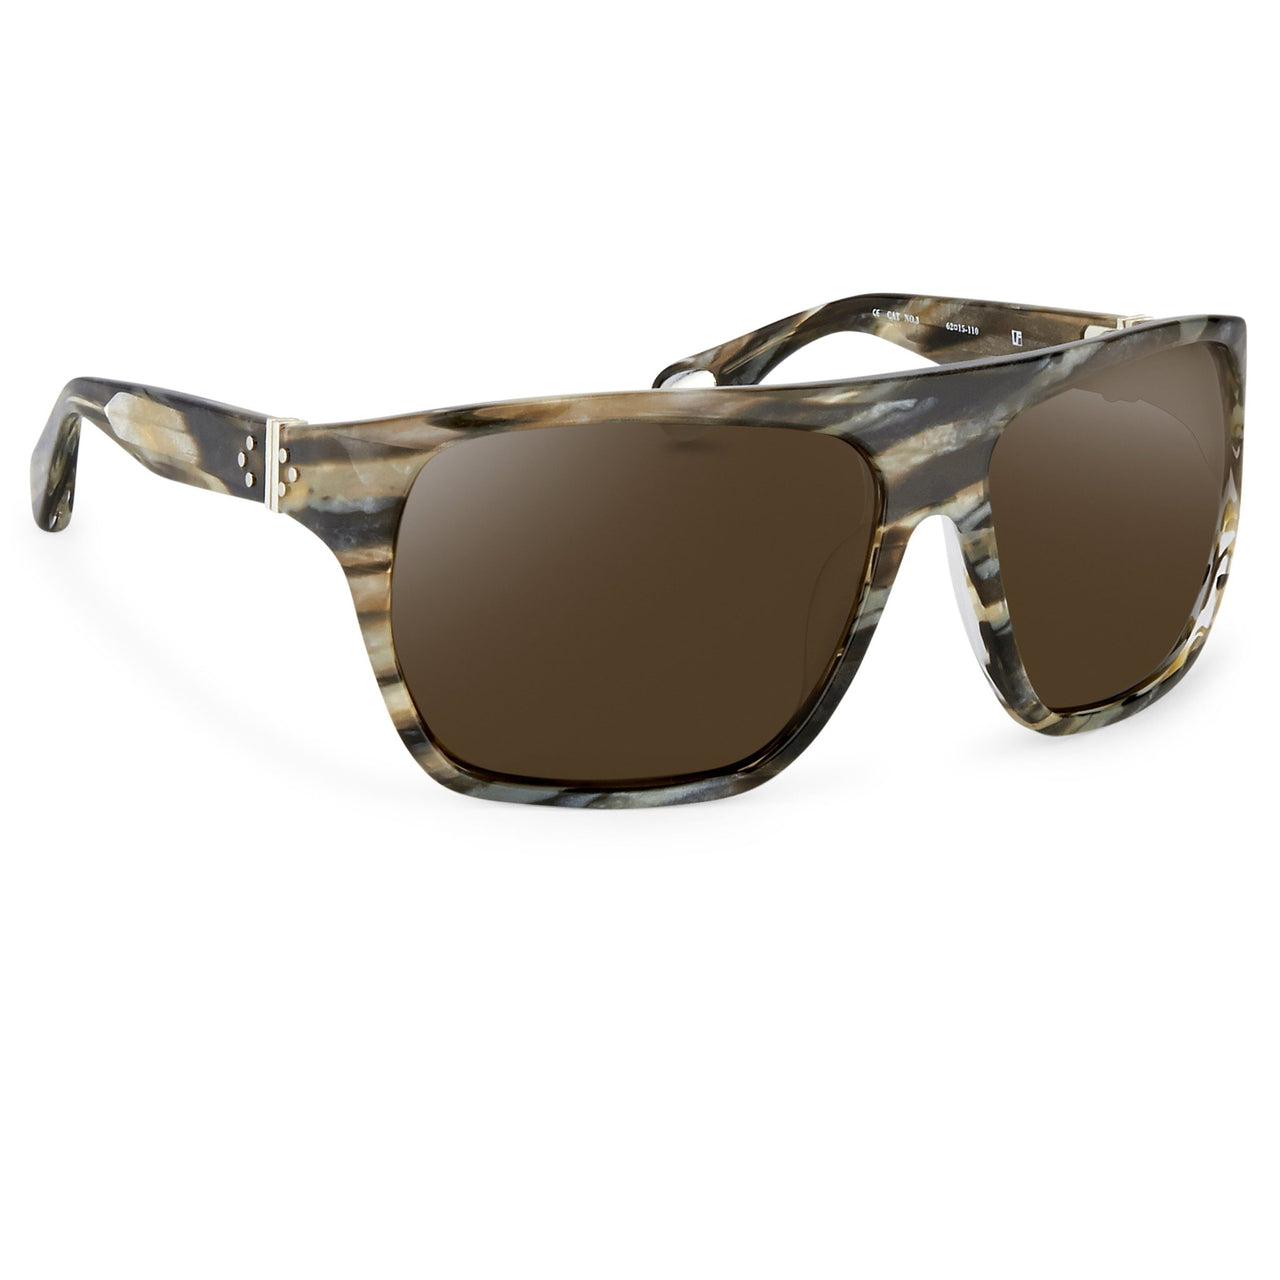 Ann Demeulemeester Sunglasses Oversized Brown Horn 925 Silver with Green Lenses CAT3 AD31C3SUN - Watches & Crystals